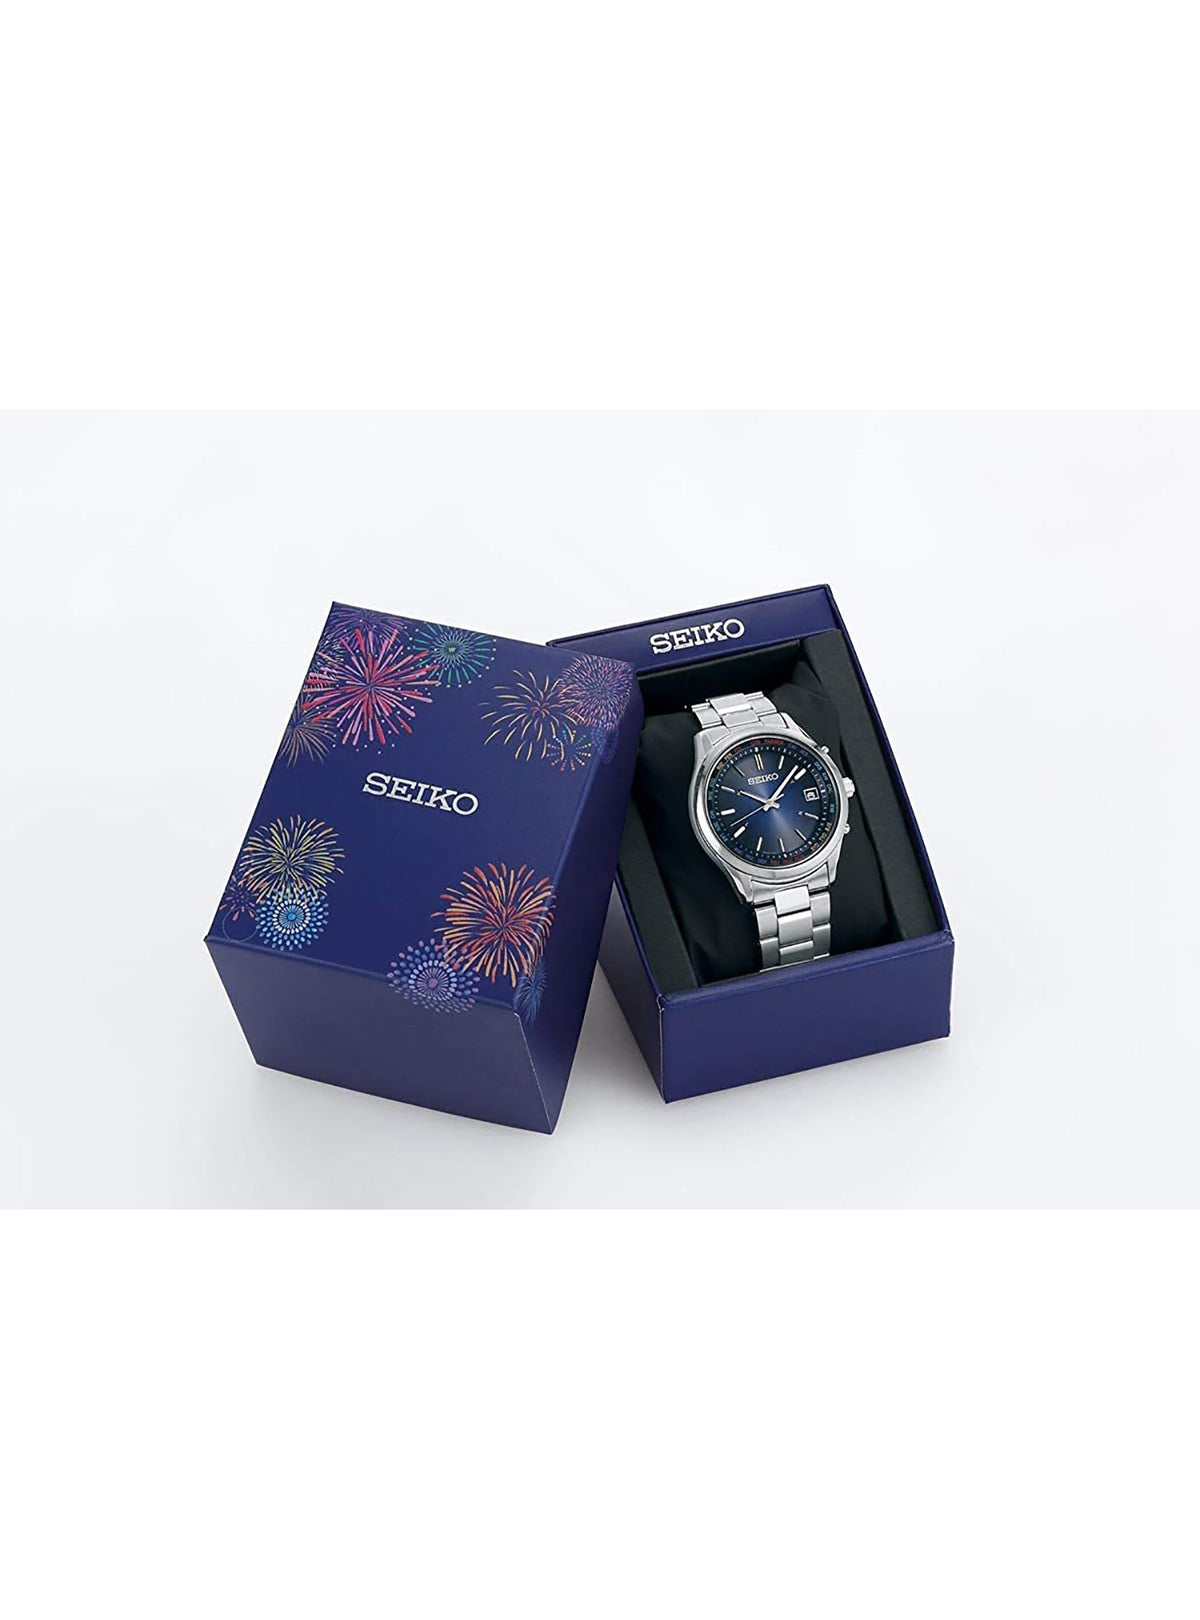 SEIKO SELECTION 2020 SUMMER LIMITED EDITION SBTM279 MADE IN JAPAN JDMWRISTWATCHjapan-select